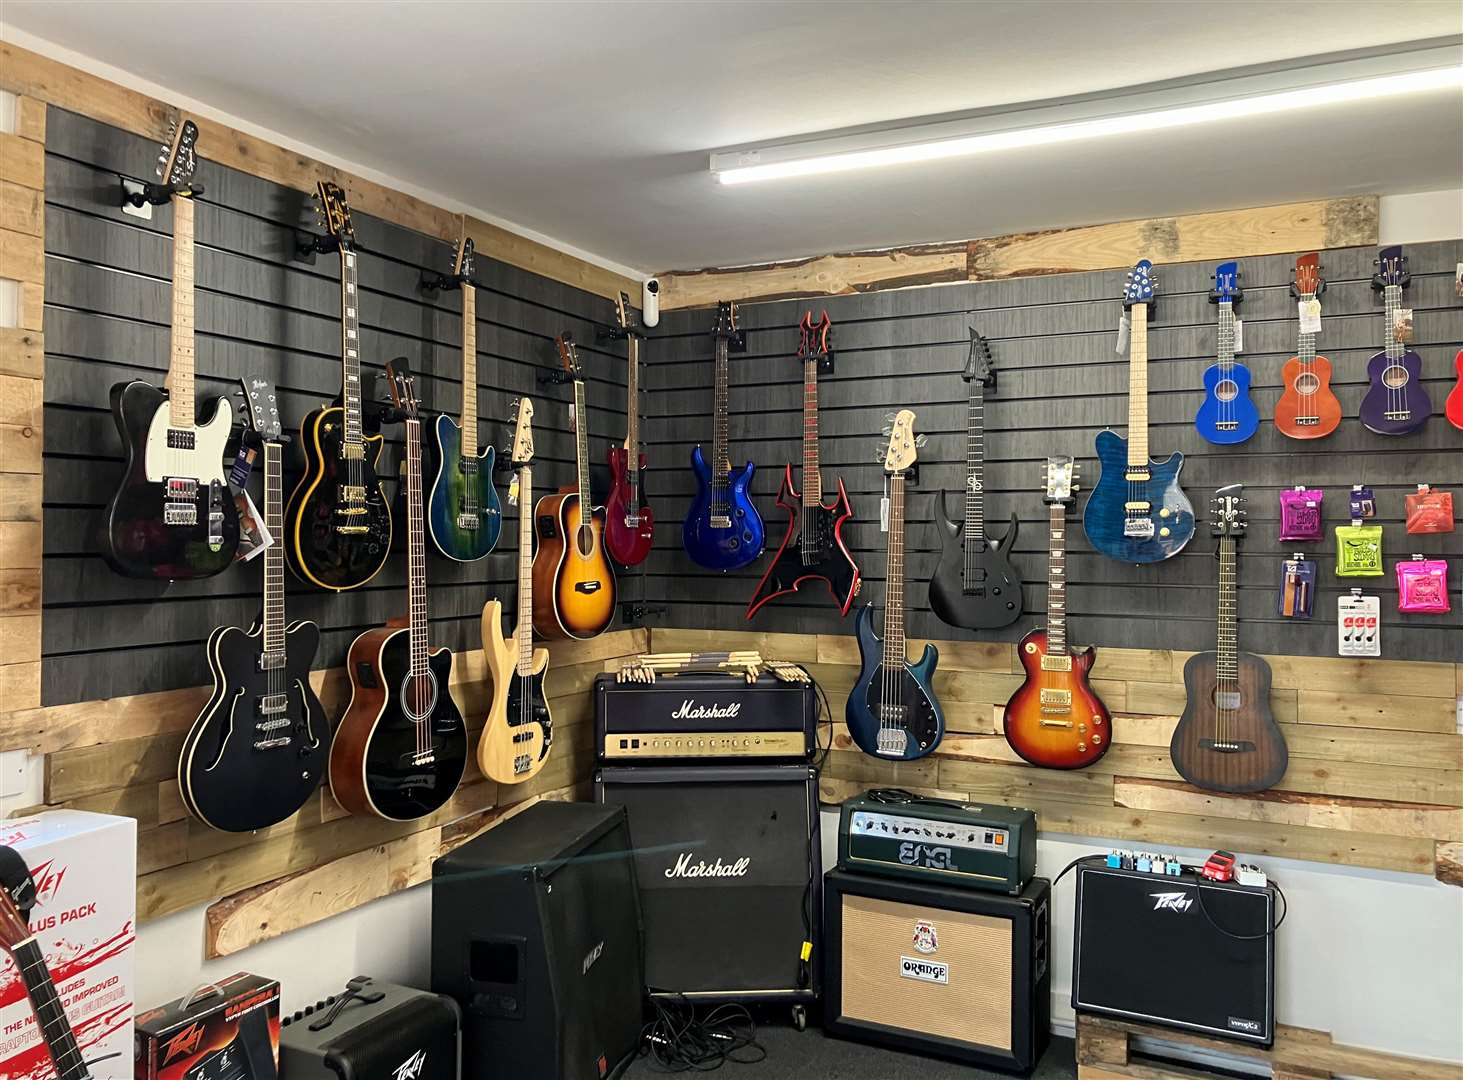 Inside Toothless Guitars, which has opened alongside the Rock Music School in Maidstone